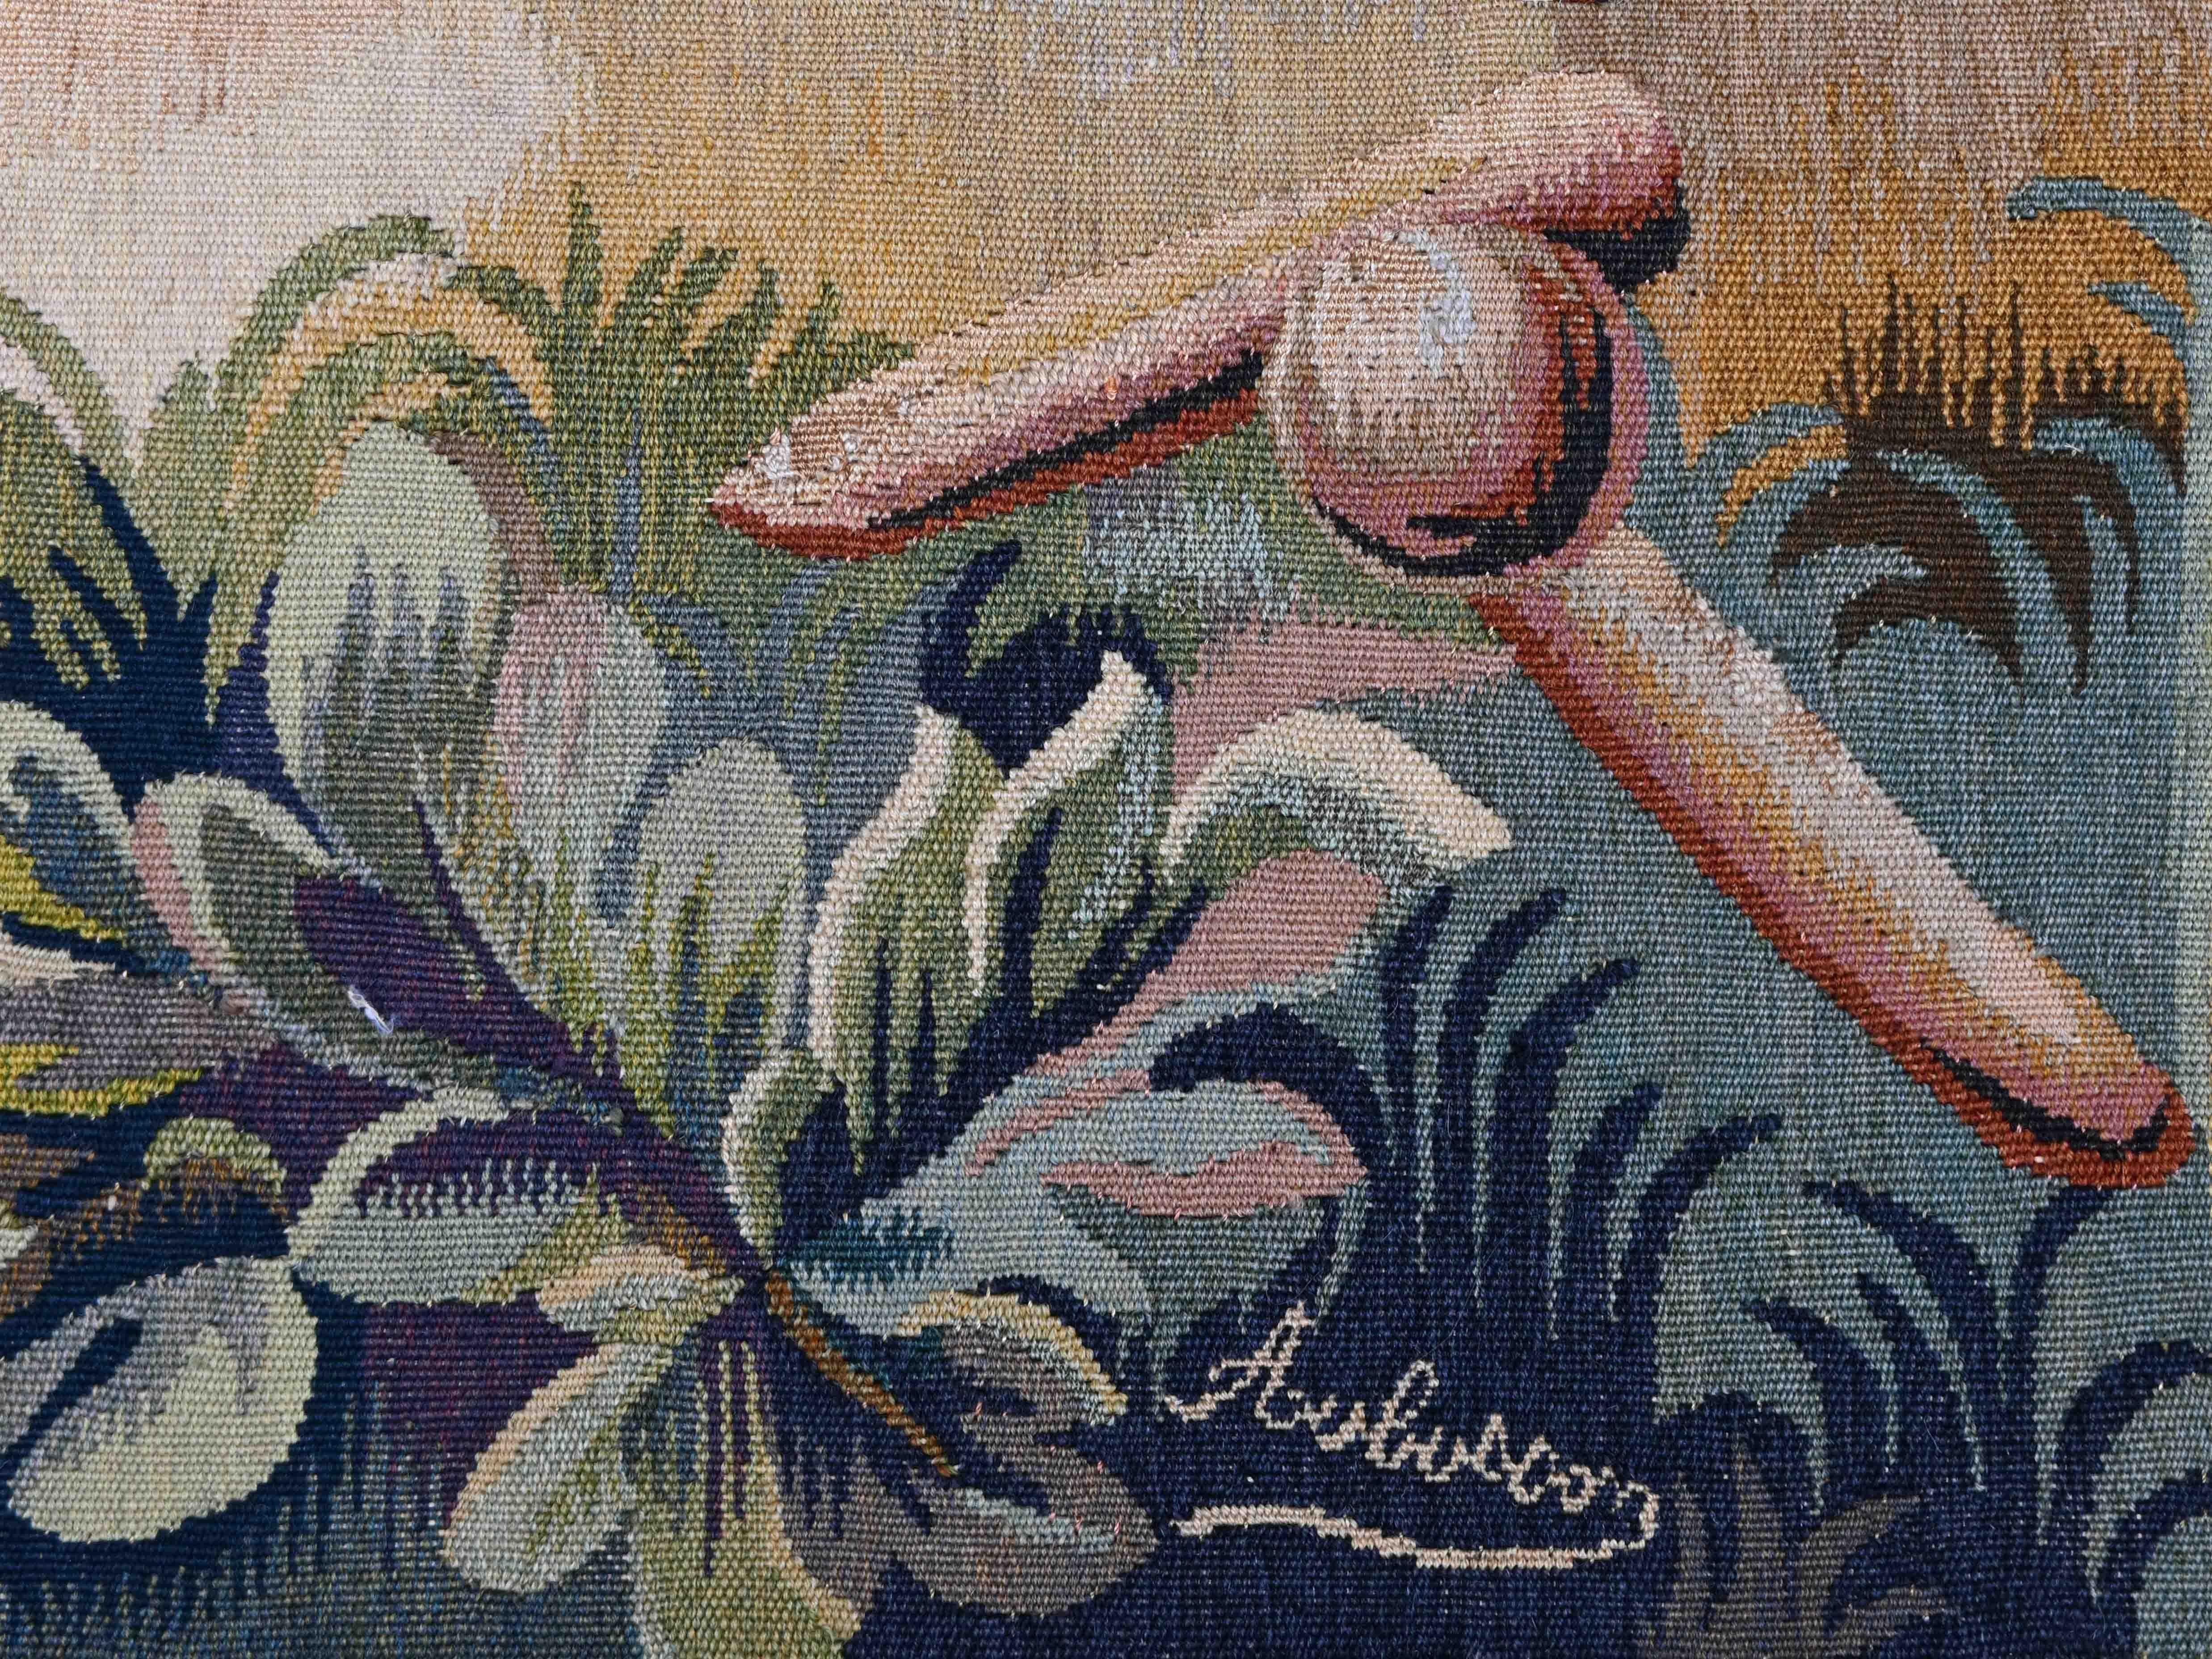 Aubusson tapestry 19th century petanque game scene - N° 1332 For Sale 4